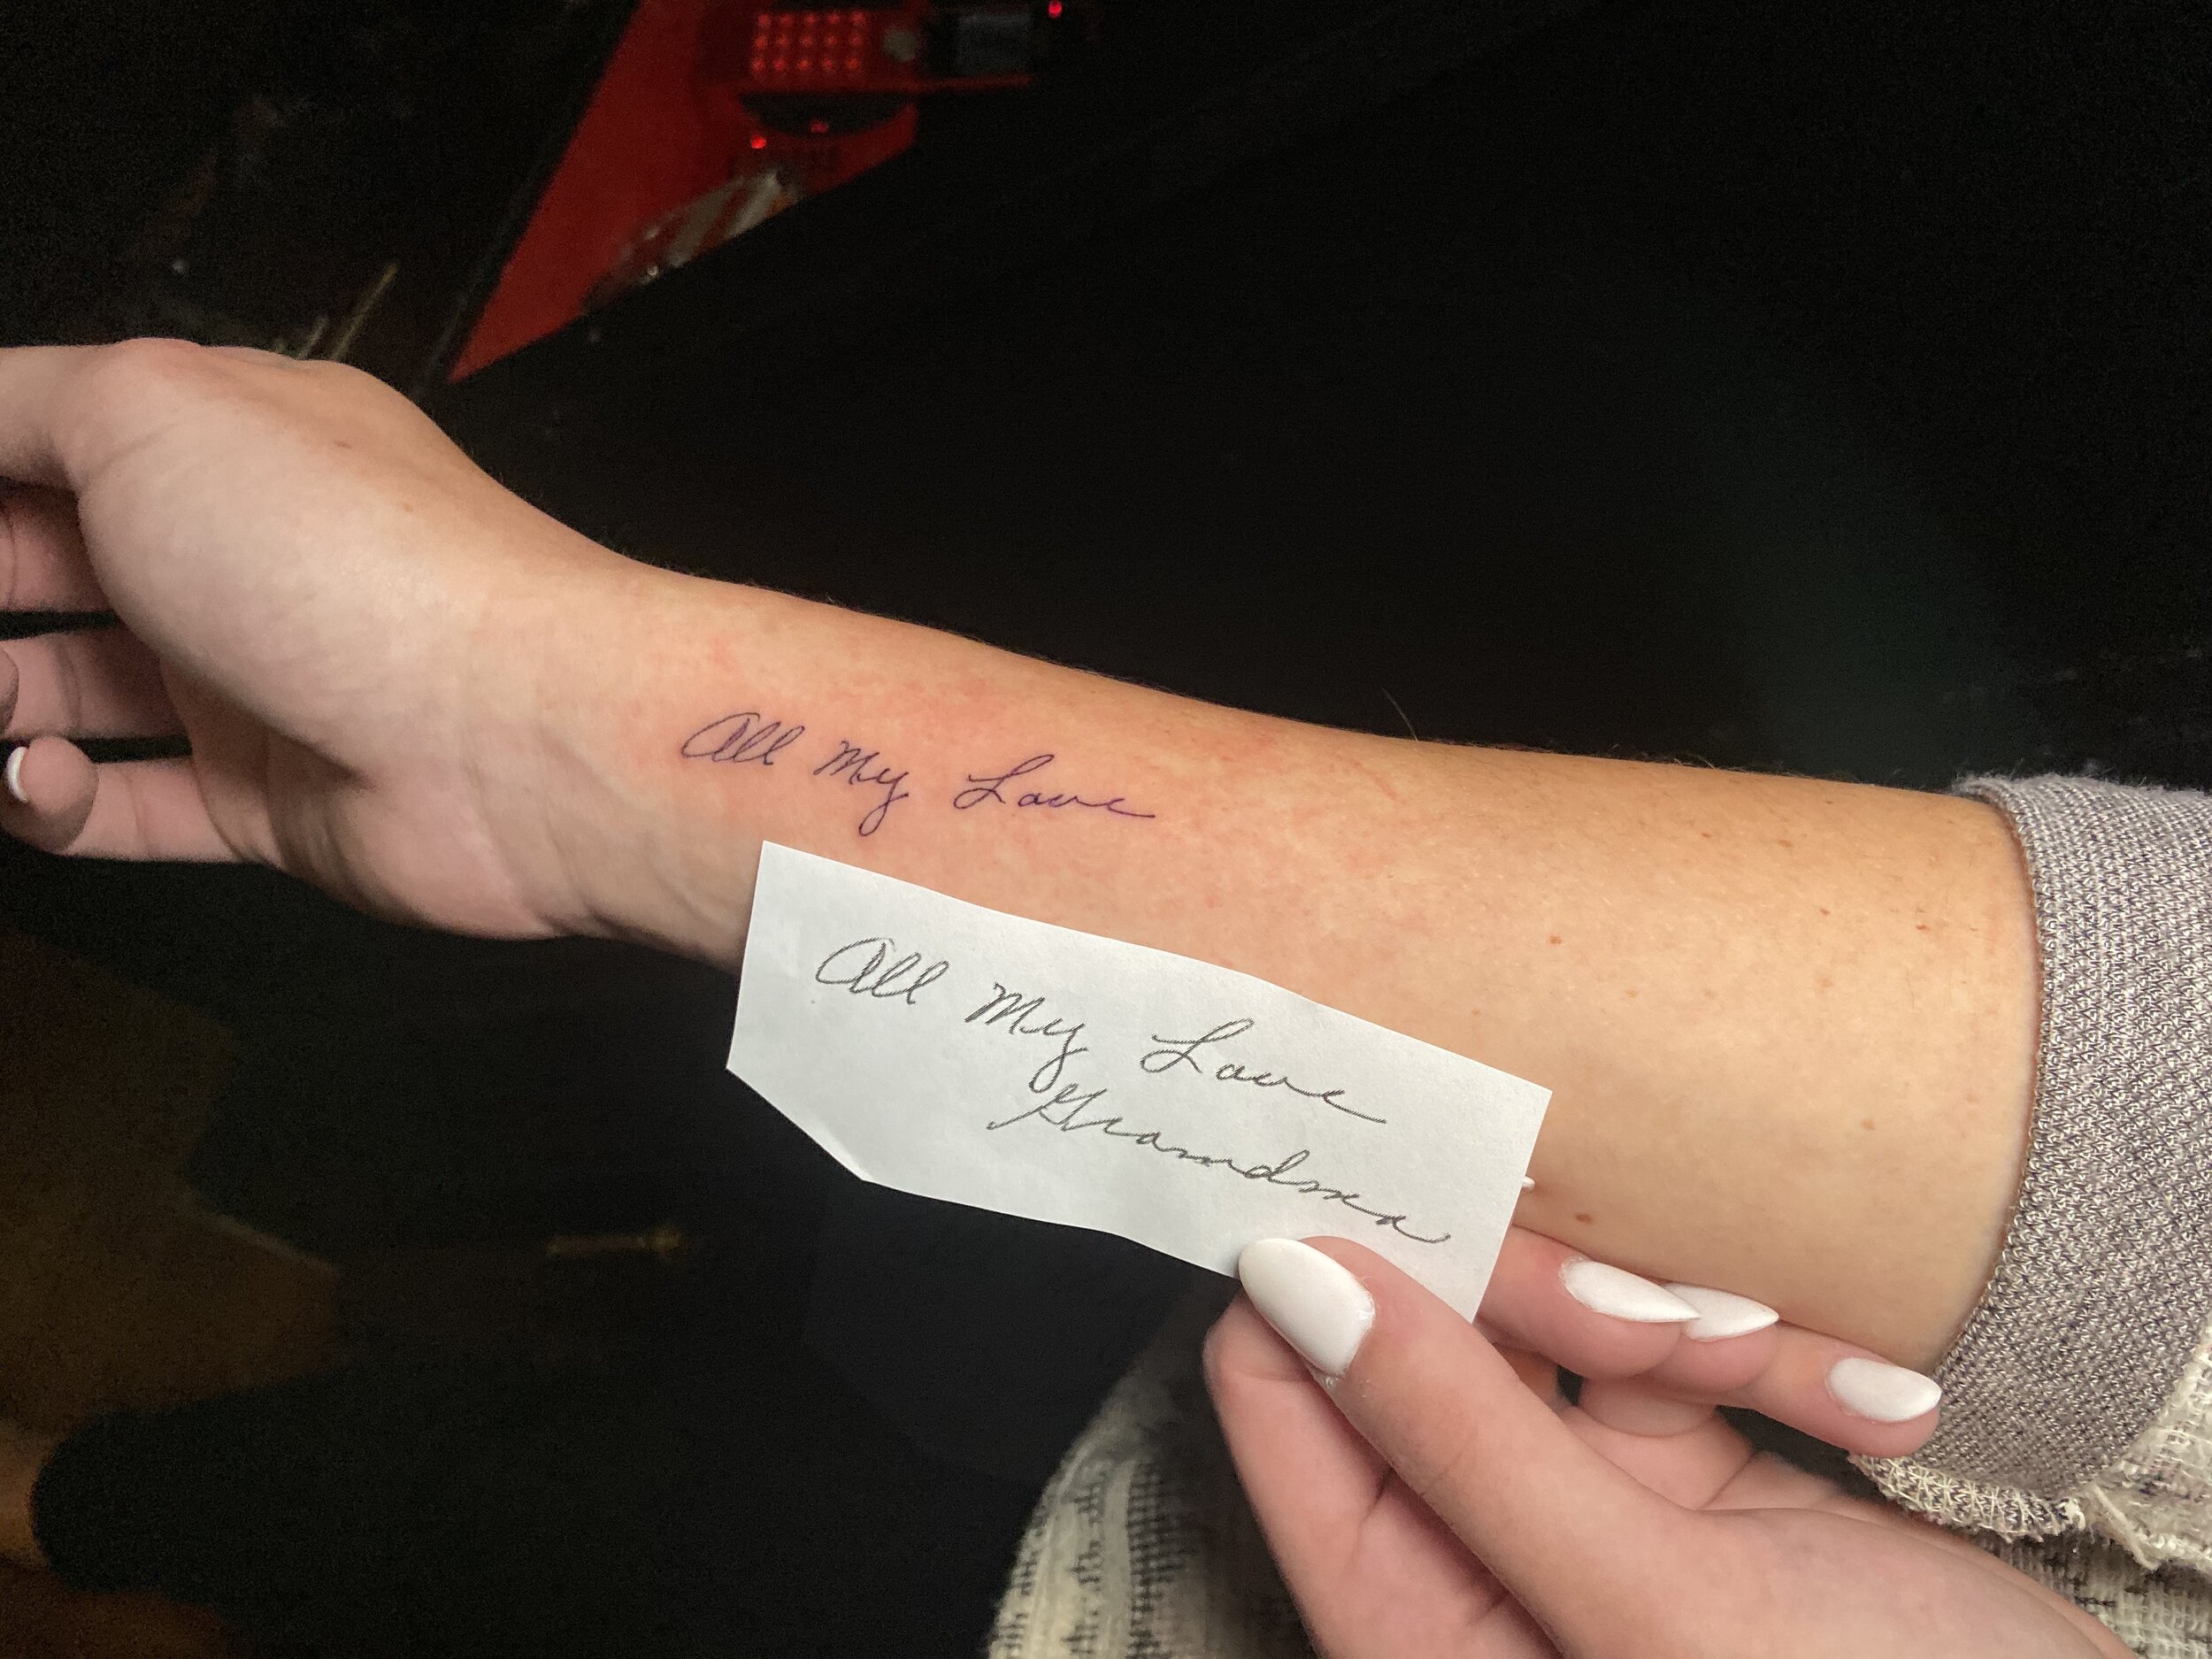  single needle script tattoo "all my love" written in handwriting of a loved one 